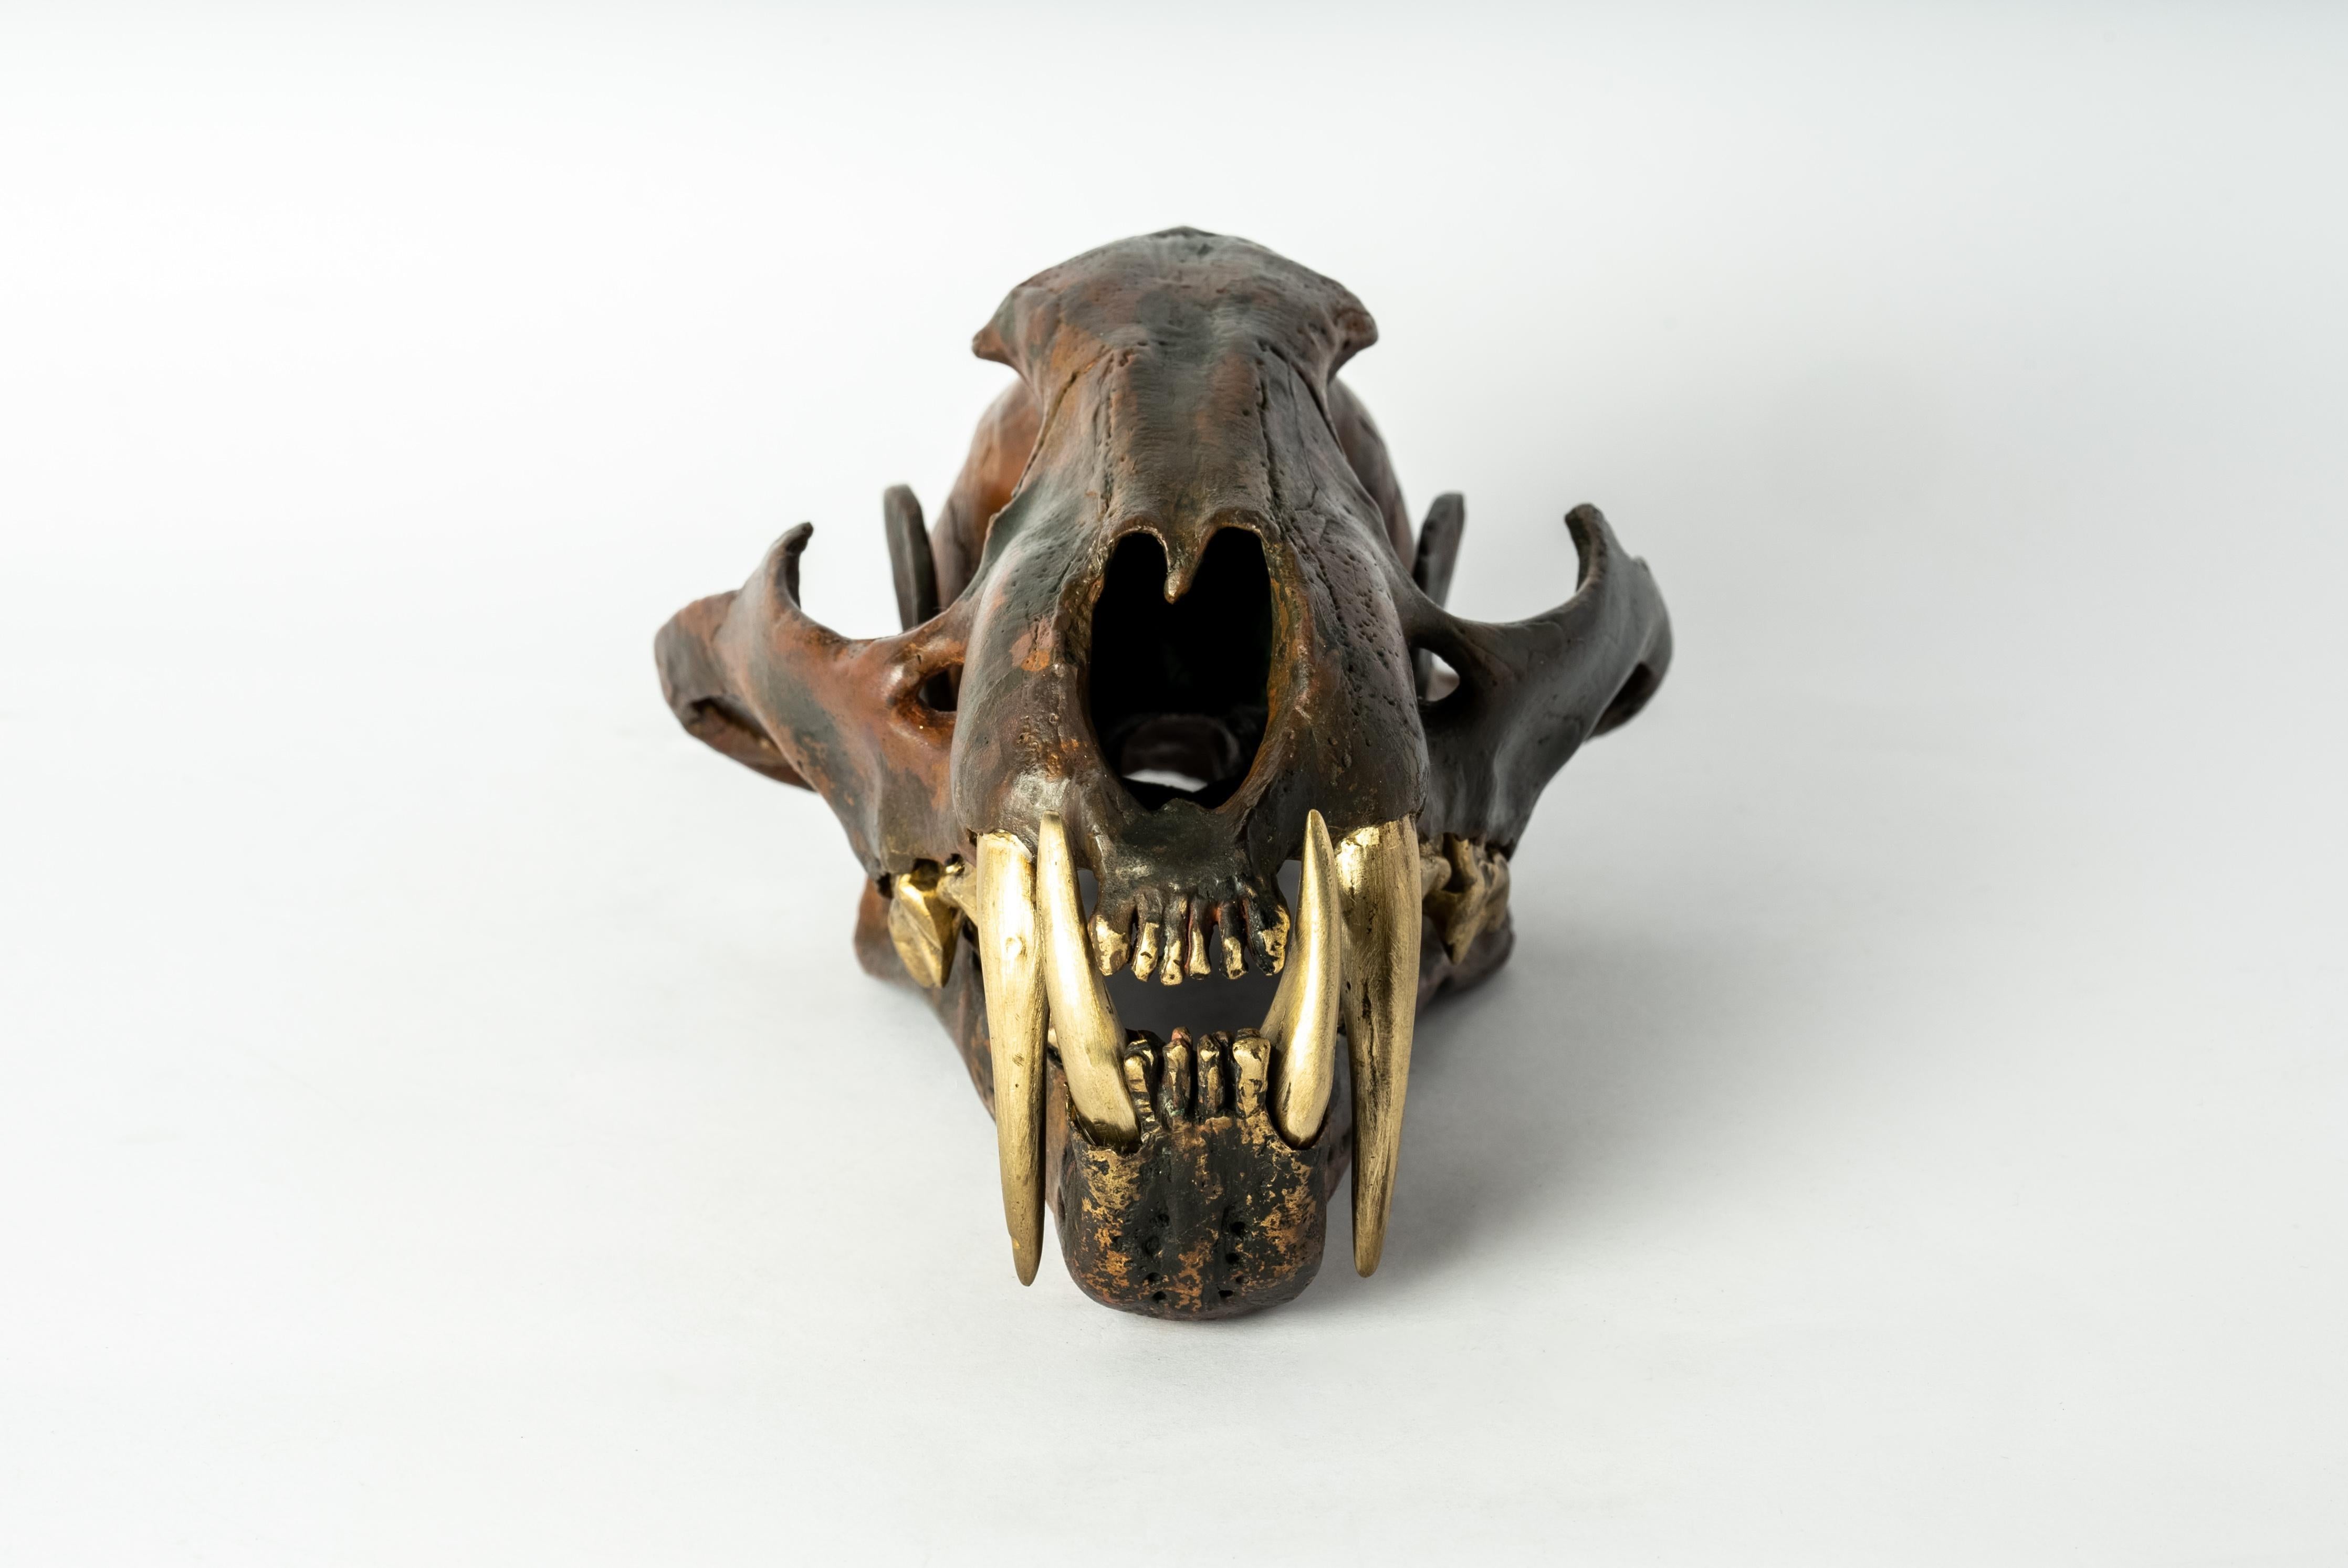 Leopard Skull in brass. It is a striking and intriguing piece of art, capturing the essence of the majestic leopard in a unique and captivating form. Its construction adds a touch of elegance to the fierce and powerful symbolism of the leopard,